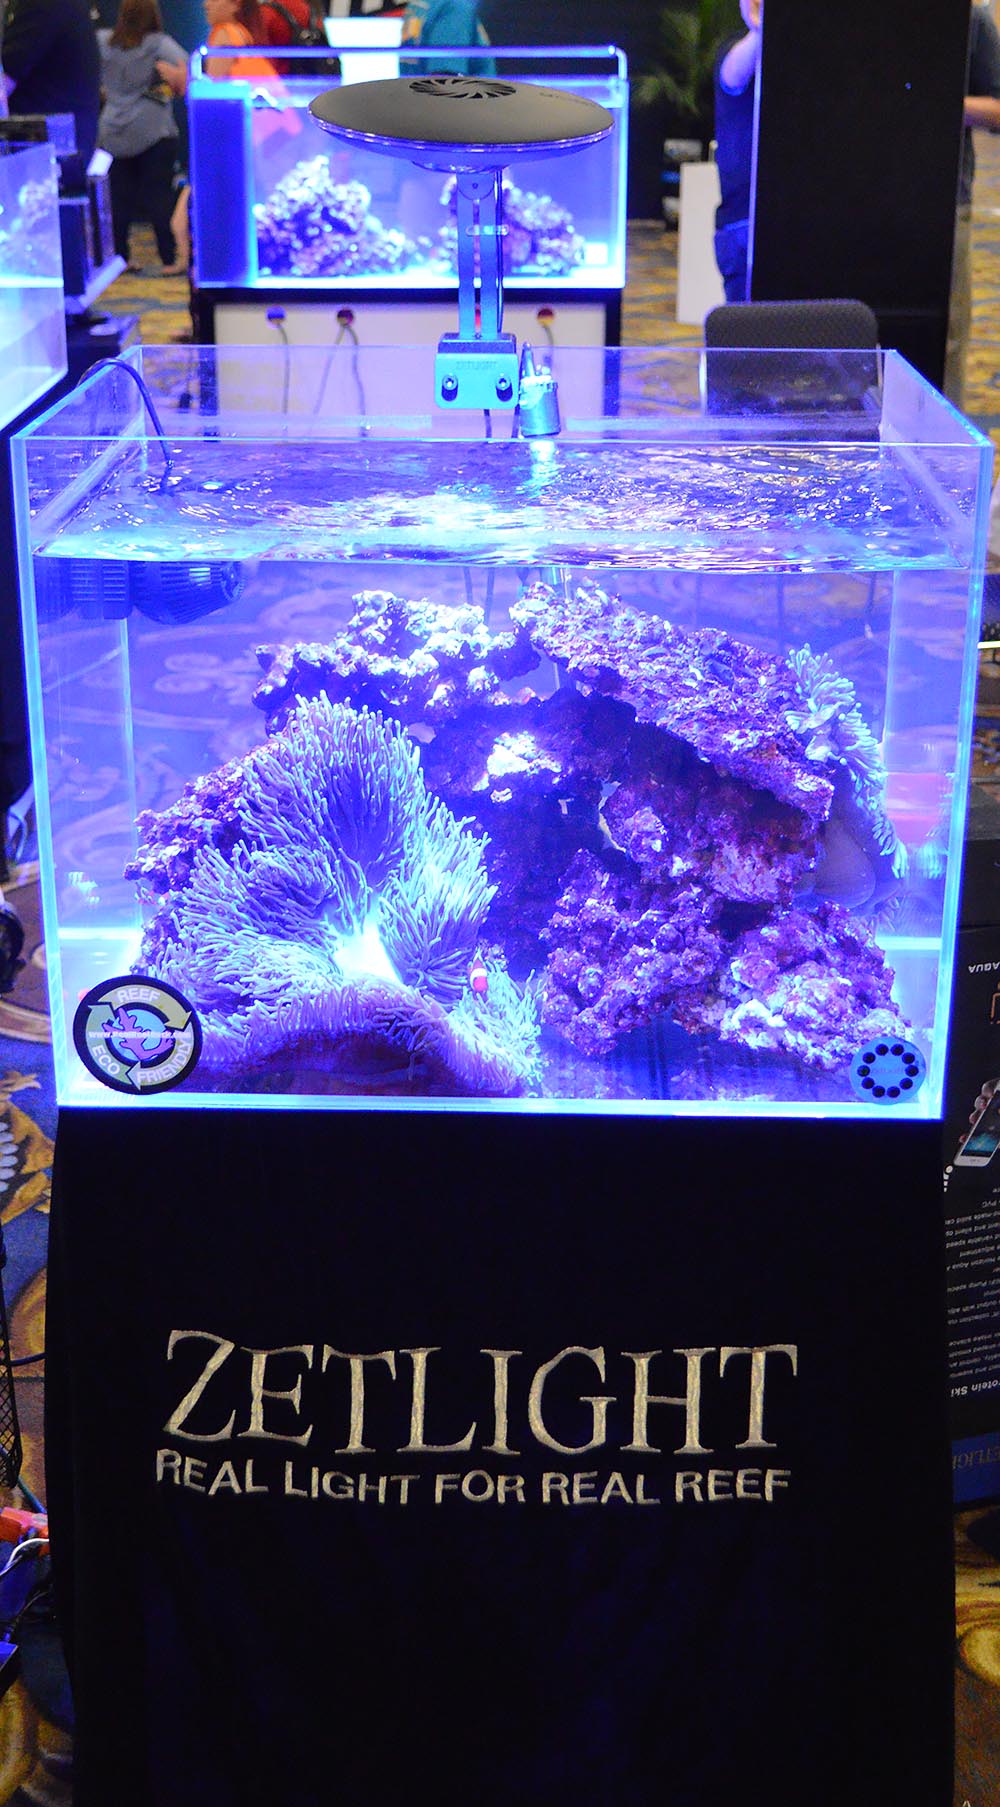 Simple and effective - a clownfish and anemone dominate this modestly-sized aquarium display by Zetlight & Ming Trading.